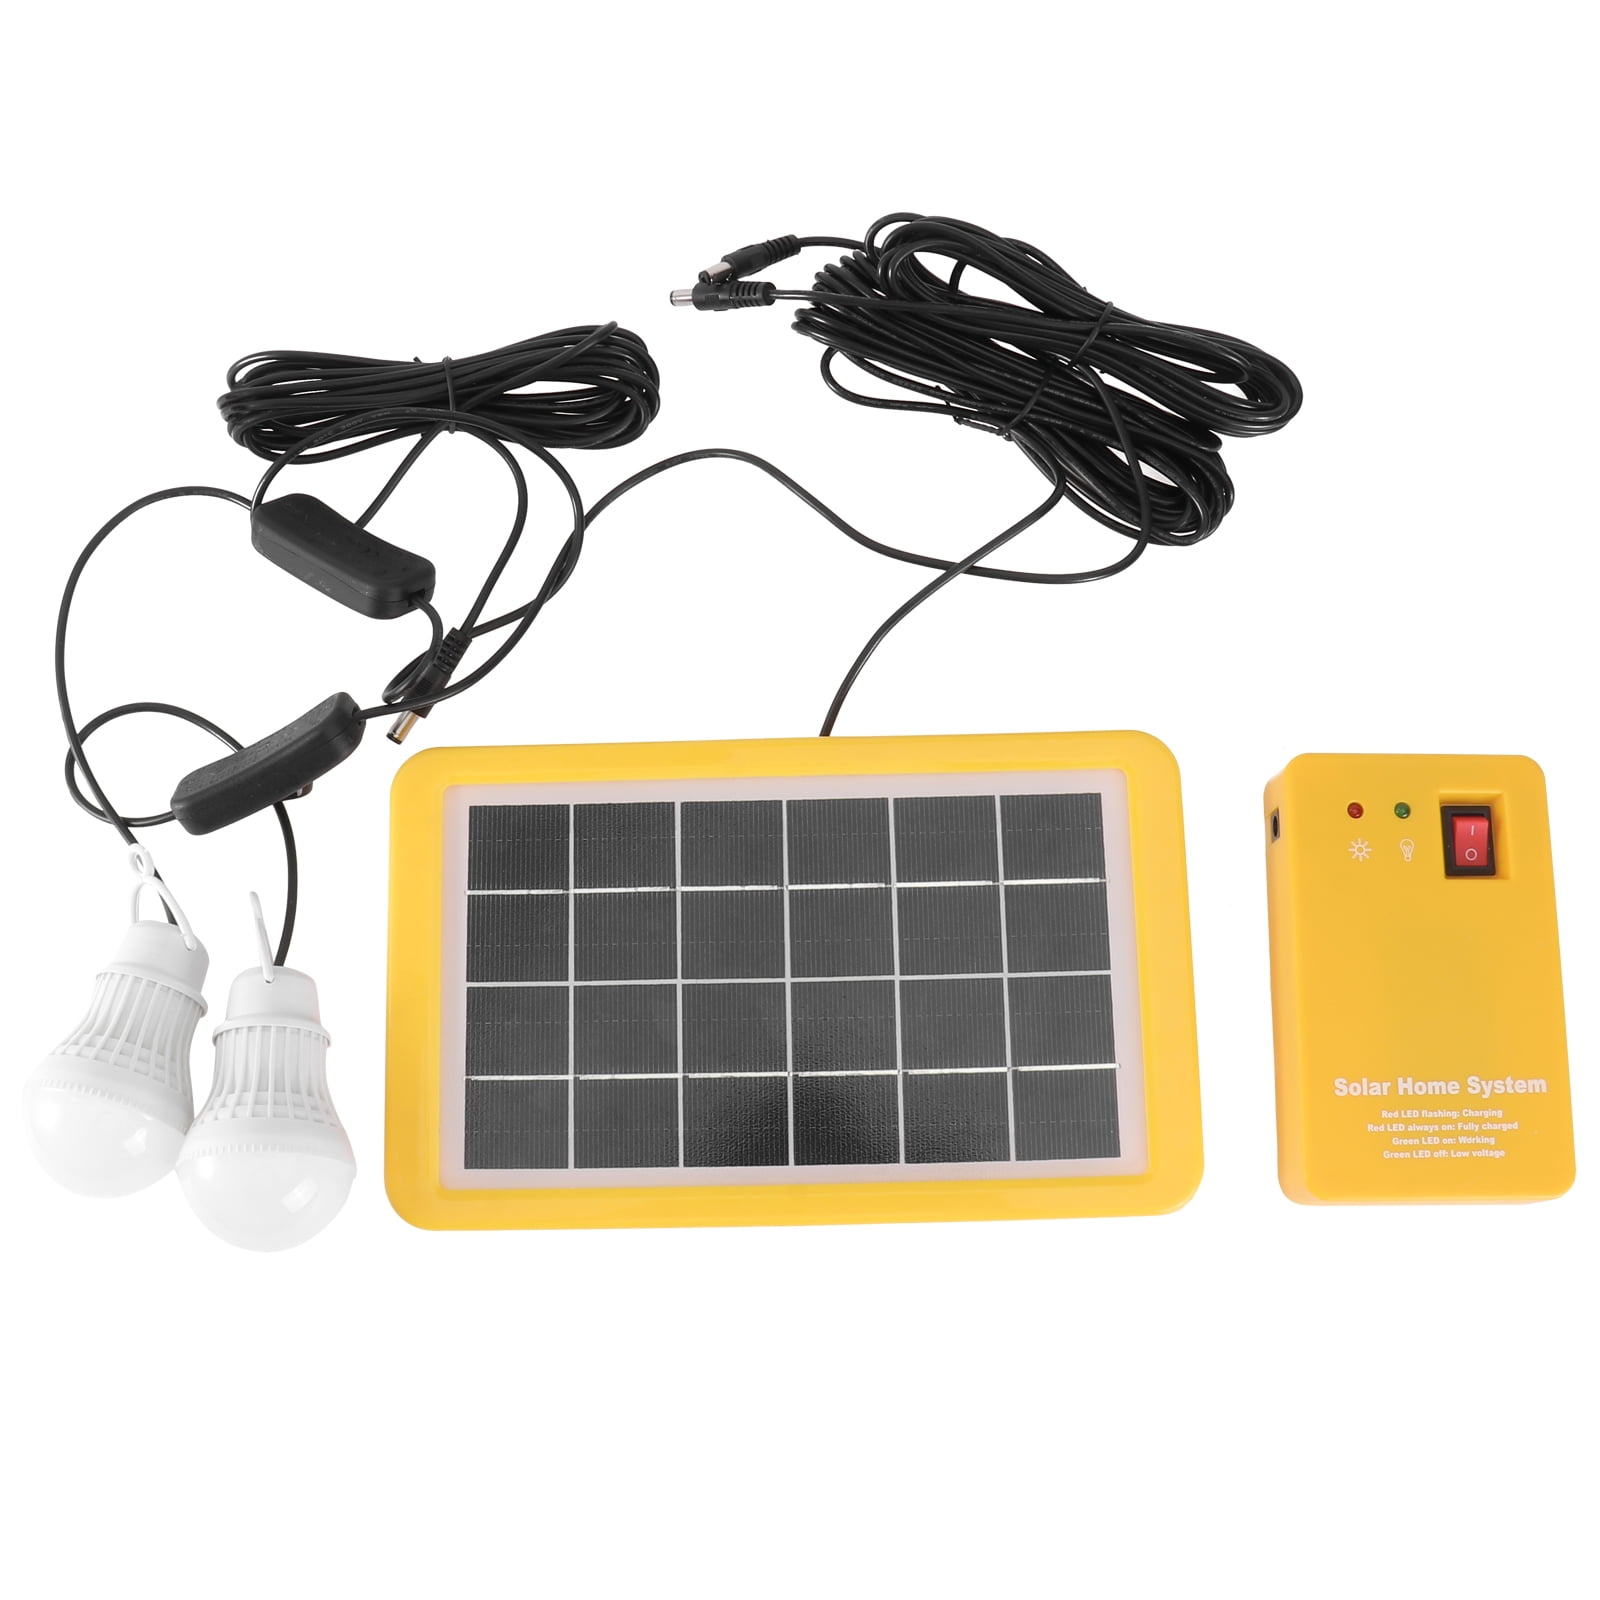 Portable 2 Bulb Outdoor Indoor Solar Panel Power Supply LED Lighting System 3USB 